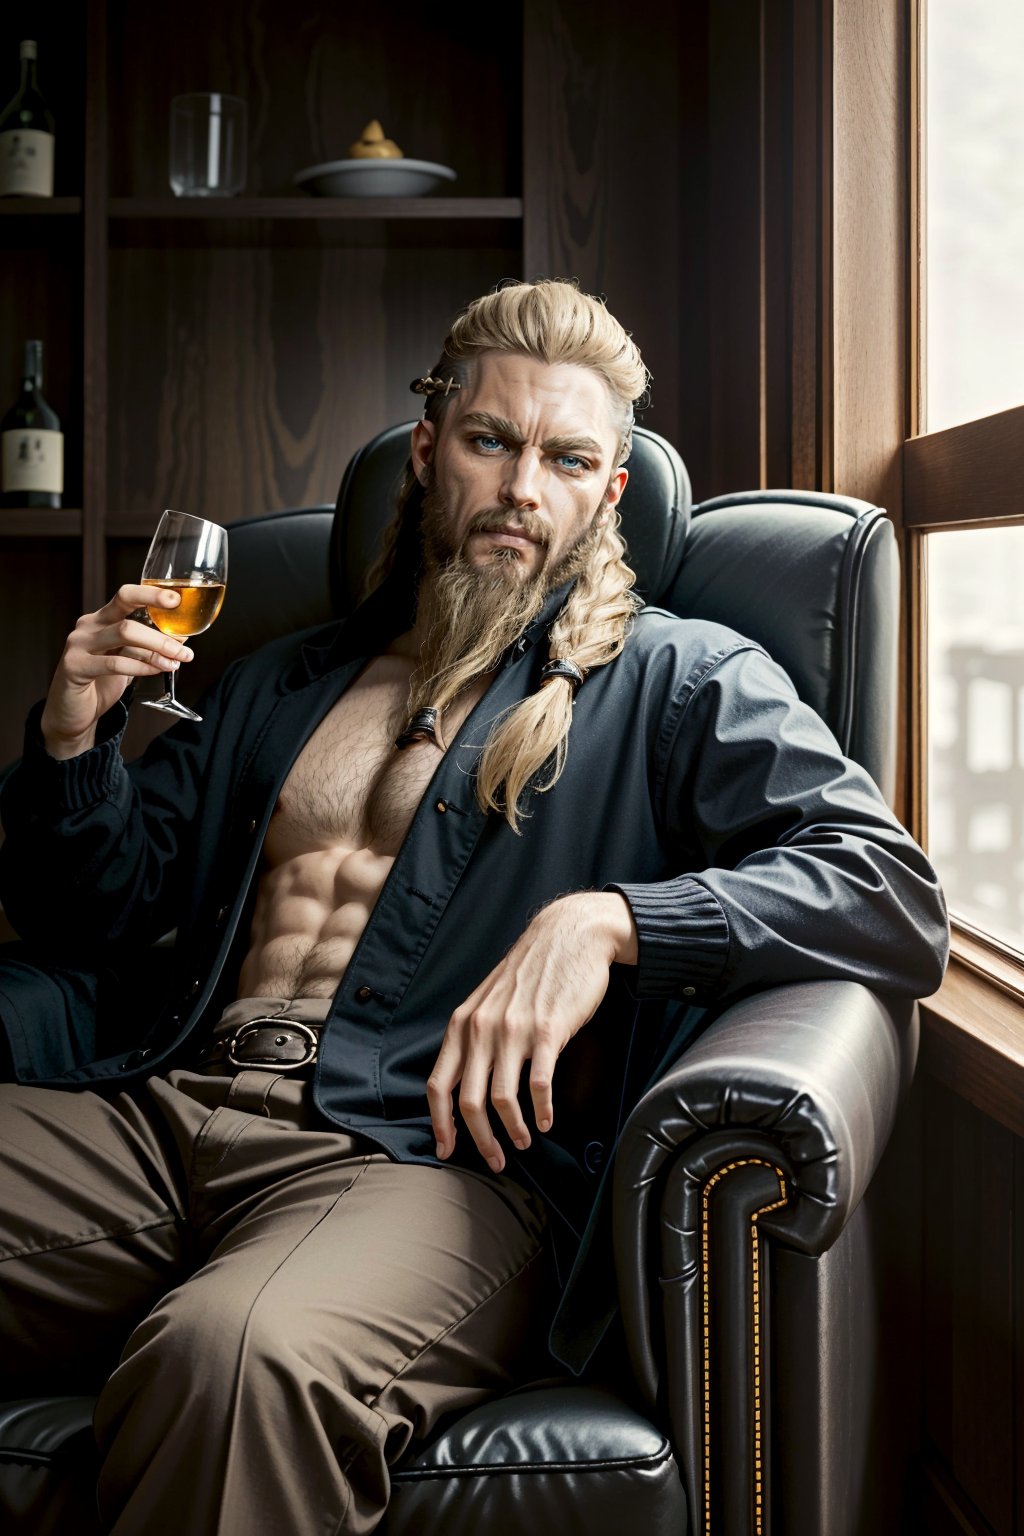 ((masterpiece, best quality))
AssaMaleEivor, 1boy, solo, long hair, beard, blonde hair, blue eyes, Inside a luxurious penthouse suite, sophisticated yakuza attire, reclining on a leather chair with a glass of whiskey, surrounded by opulence
